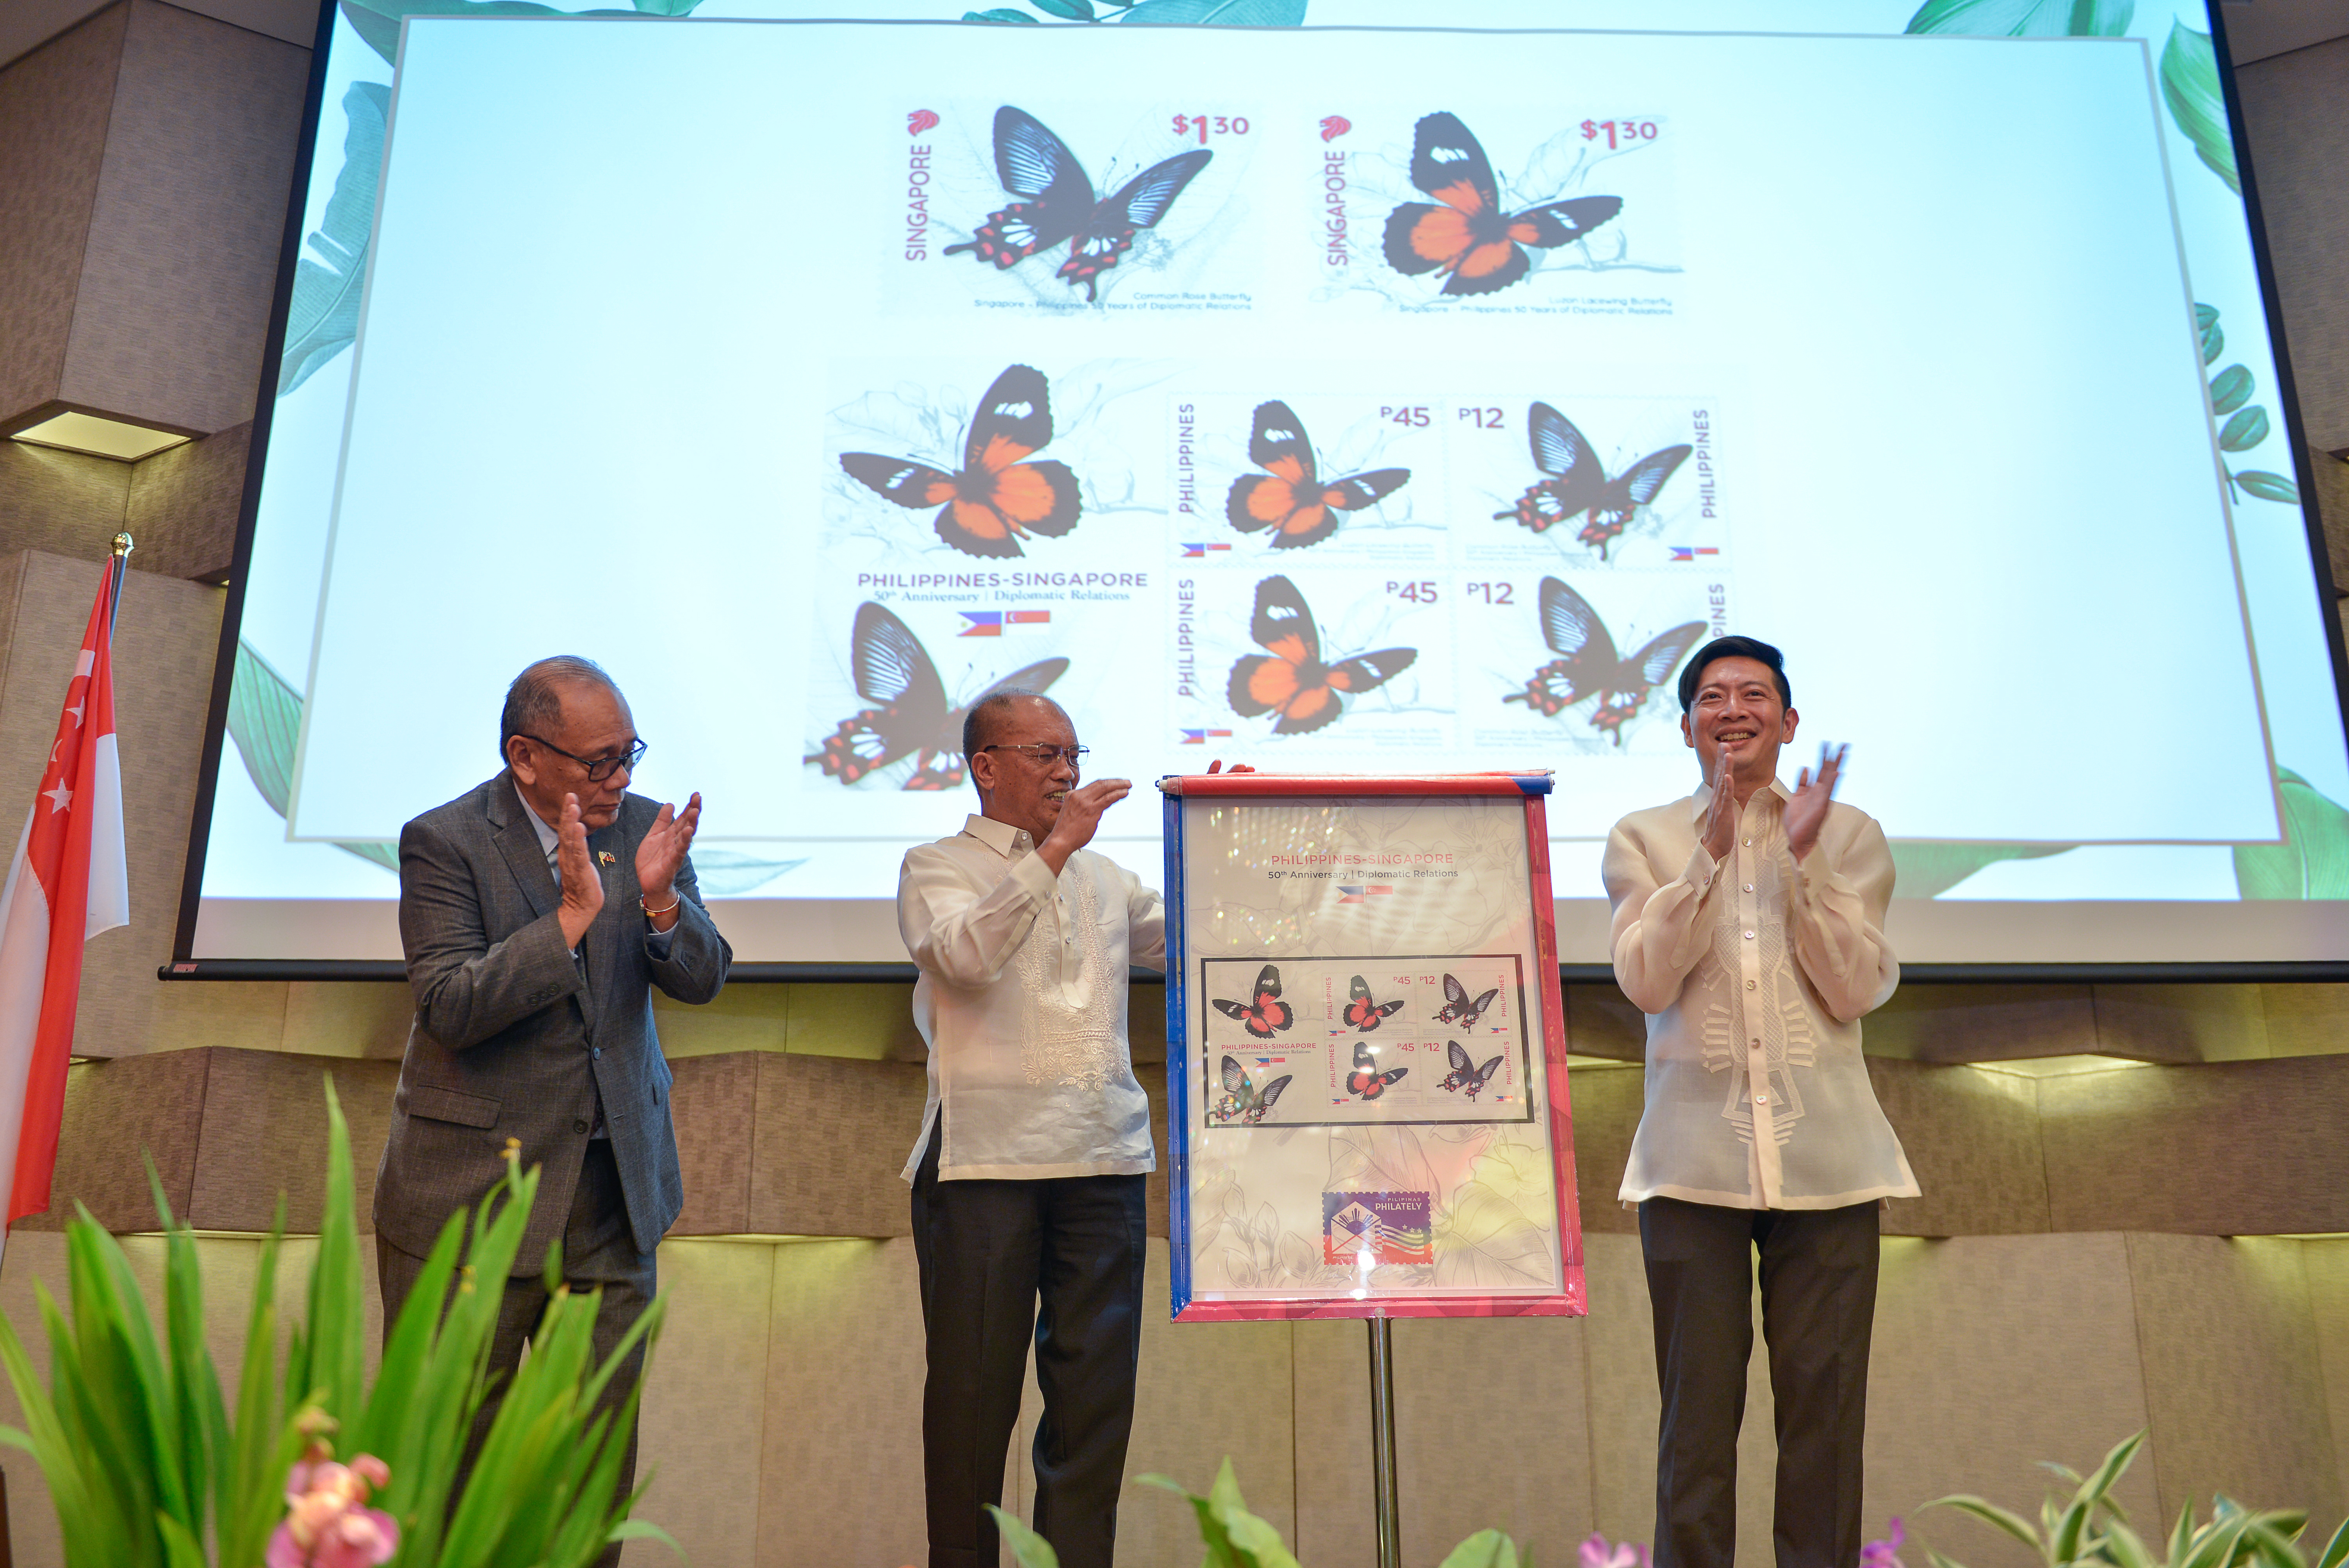 Ambassador Gerard Ho, Acting Secretary Abella, and Postmaster General Joel Otarra also unveiled a set of joint commemorative stamps issued by the Singapore Post and the Philippine Postal Corporation